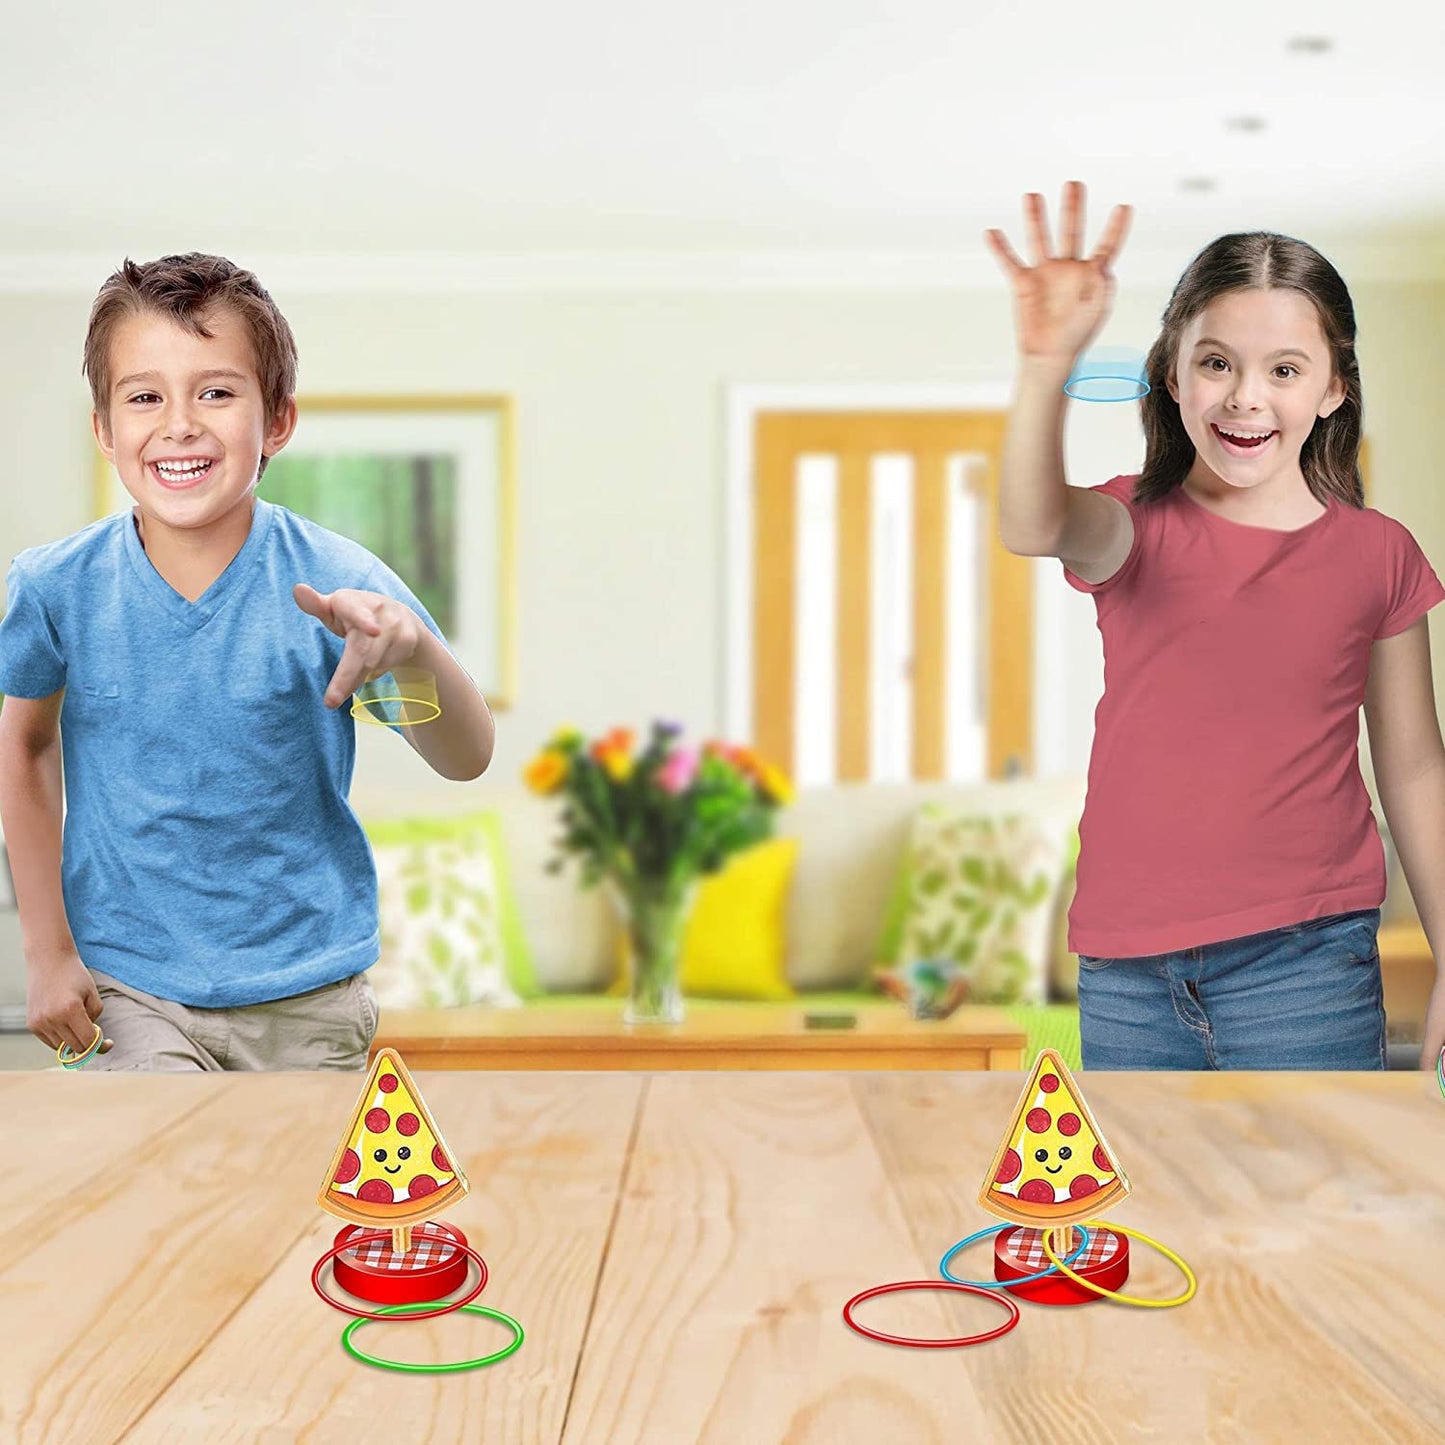 Gamie Pizza Ring Toss Games for Kids, Set of 6, Mini Desktop Ring Tossing Games with Pizza Stand and 4 Rings, Carnival Birthday Party Favors, Goodie Bag Fillers, Fun Indoor Toys for Boys and Girls